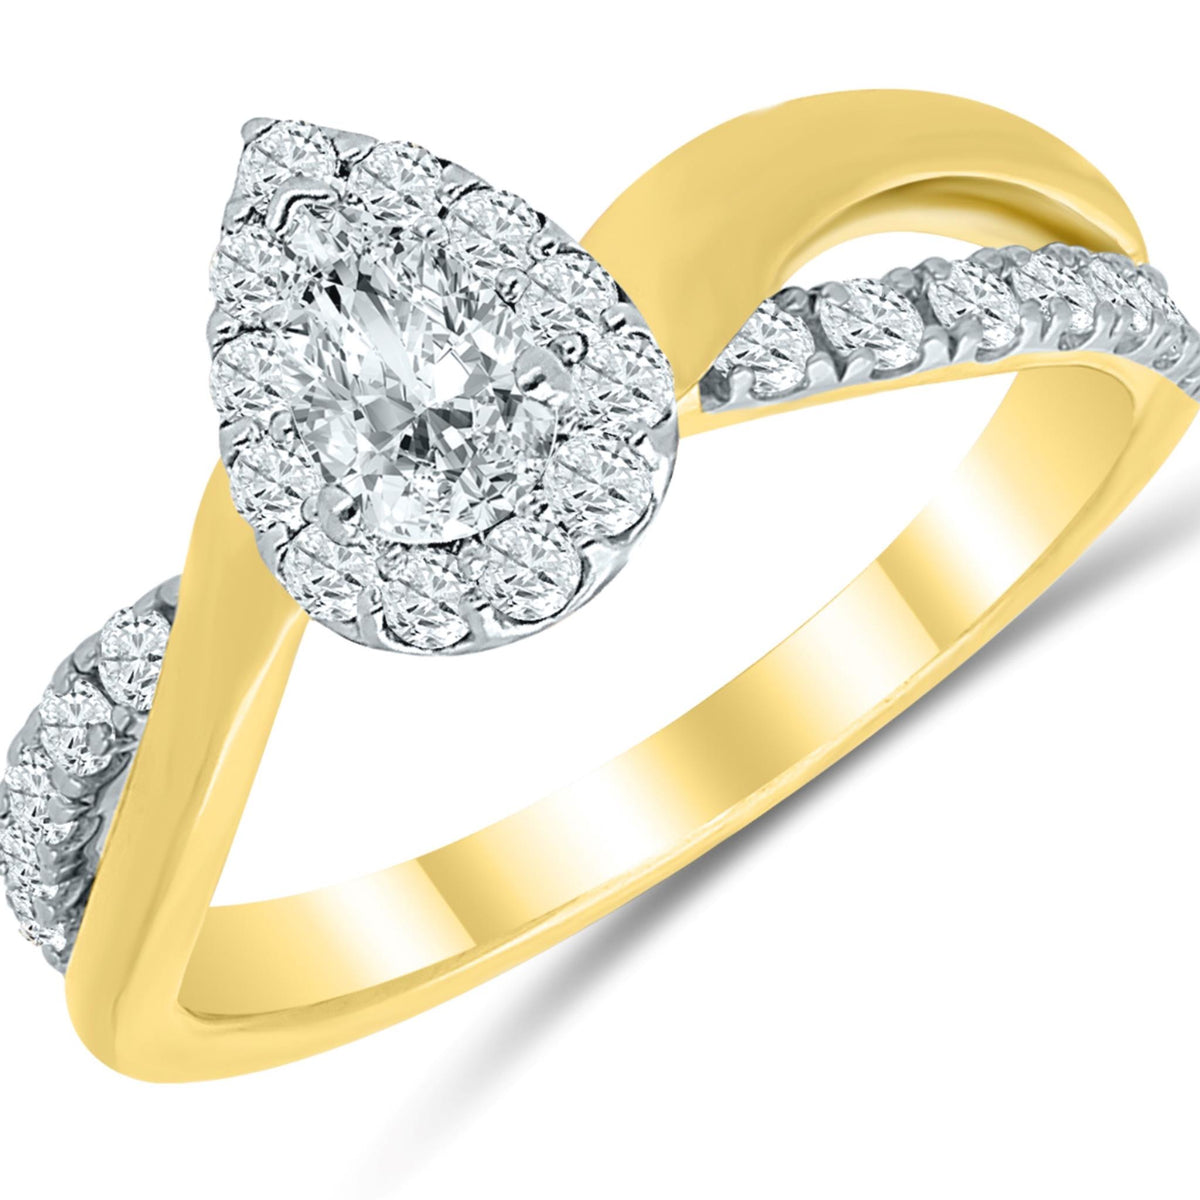 14Kt Yellow & White Gold Halo Engagement Ring With 0.33ct Natural Center Diamond